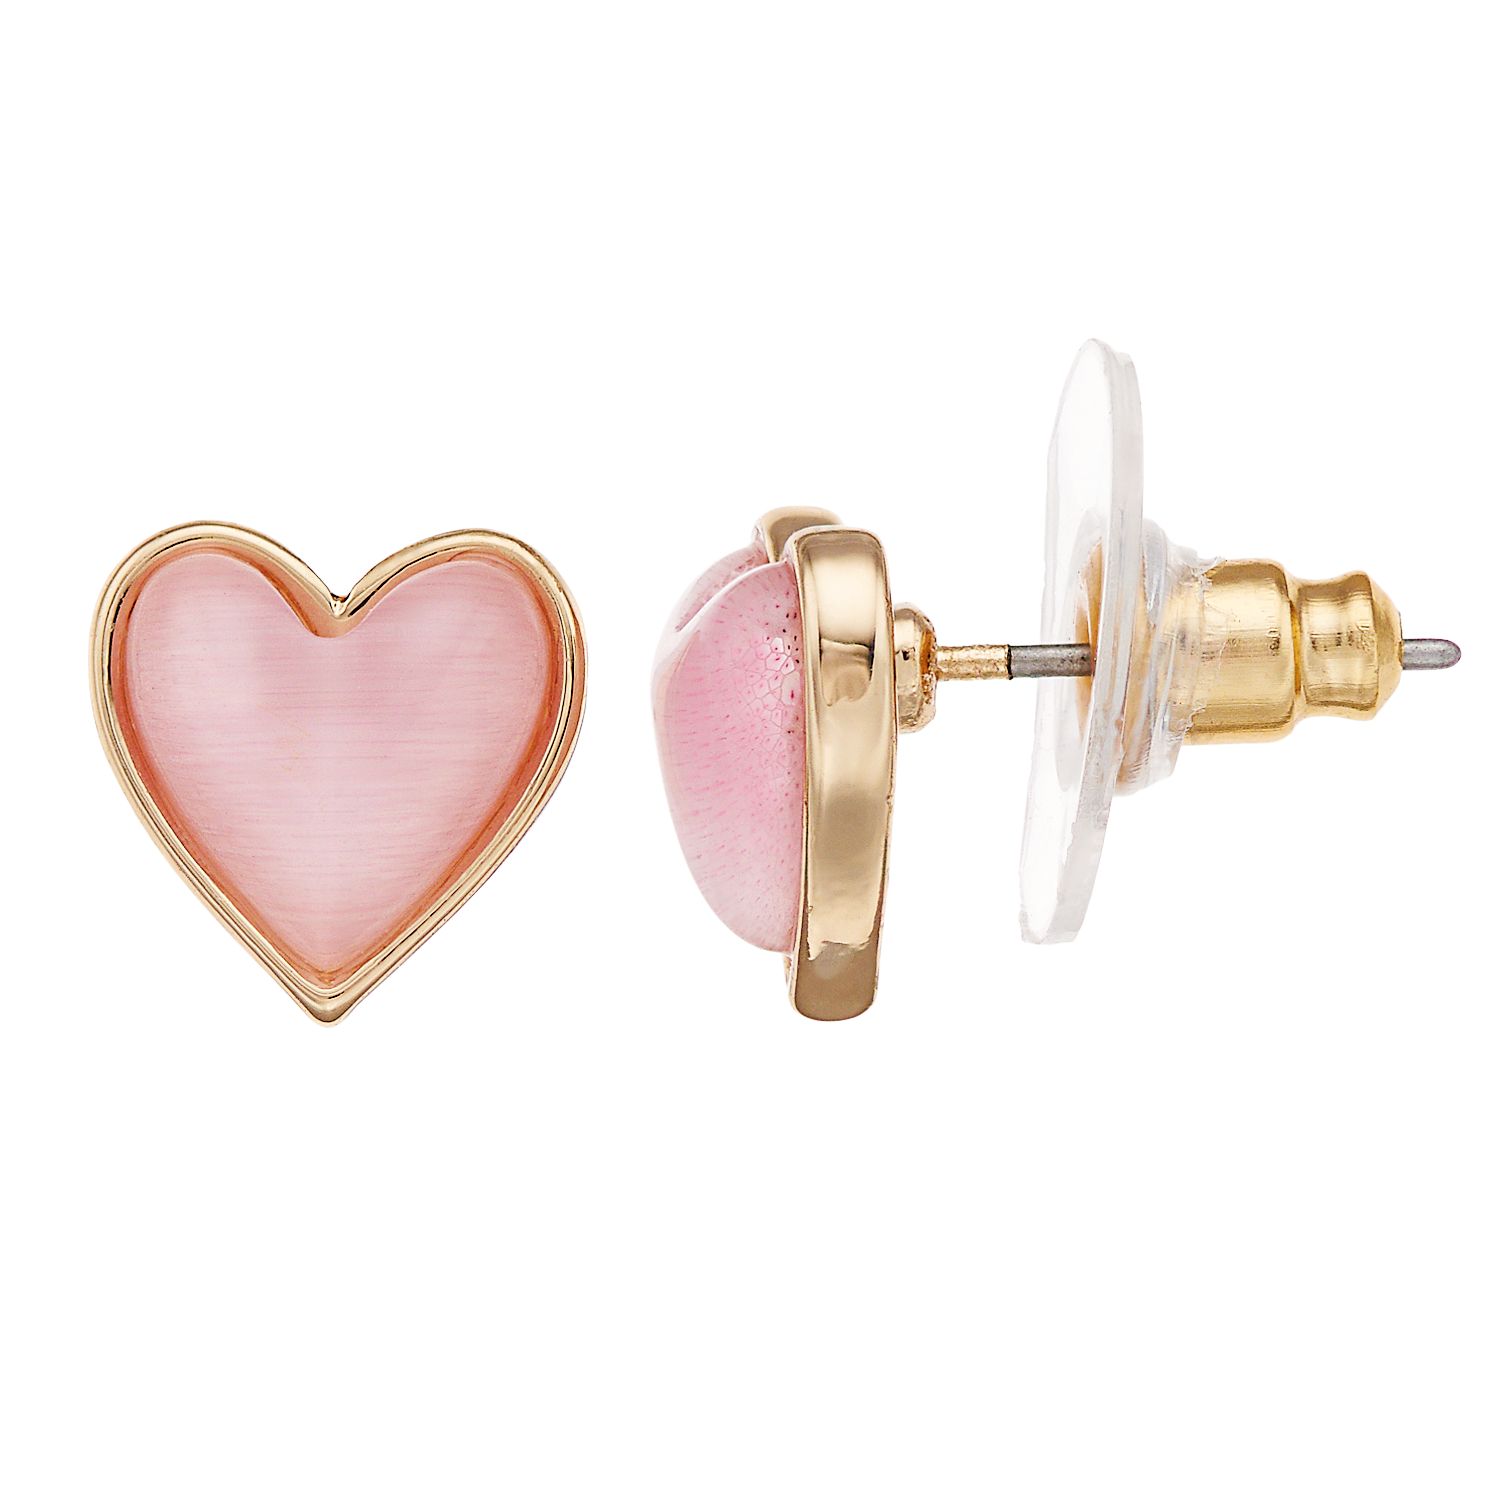 Image for LC Lauren Conrad Pink Heart Stud Nickel Free Button Earrings at Kohl's.